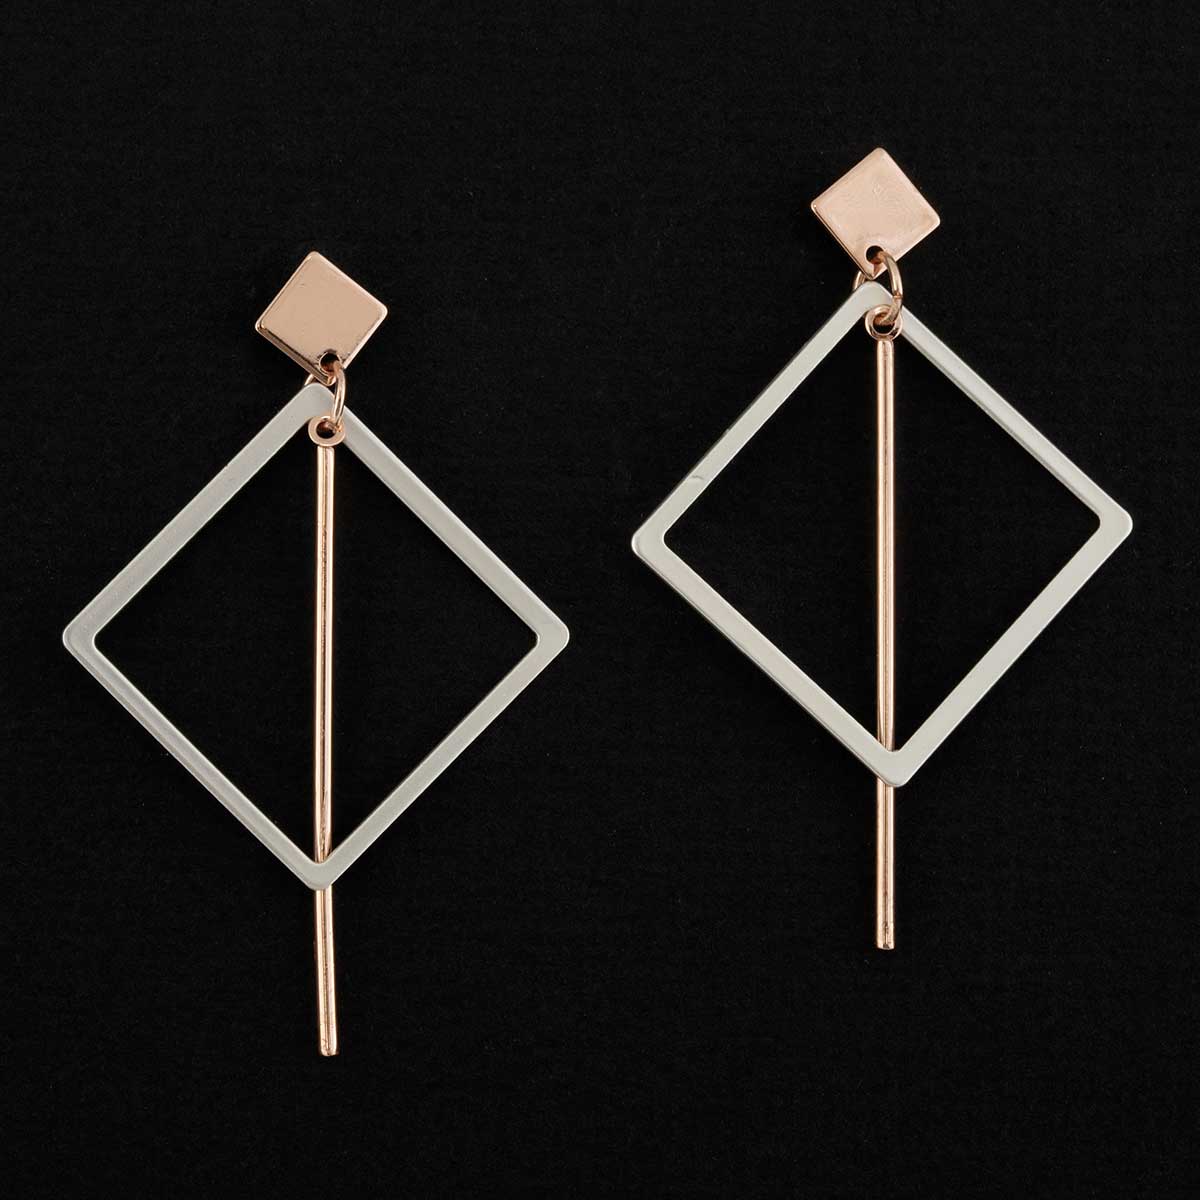 Satin Silver and Rose Gold Geometric Post Earrings 2"x1.5"